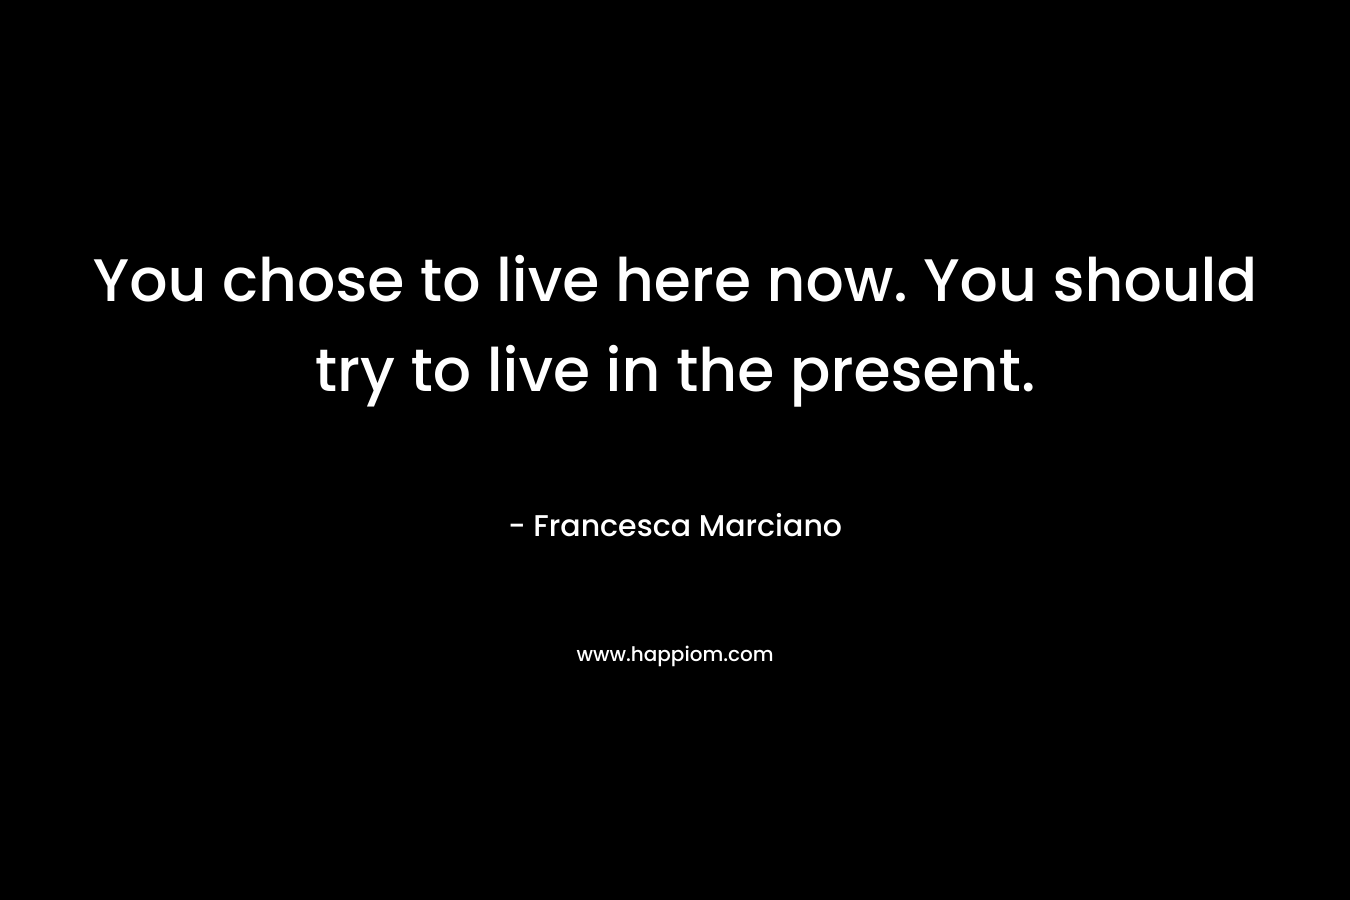 You chose to live here now. You should try to live in the present.